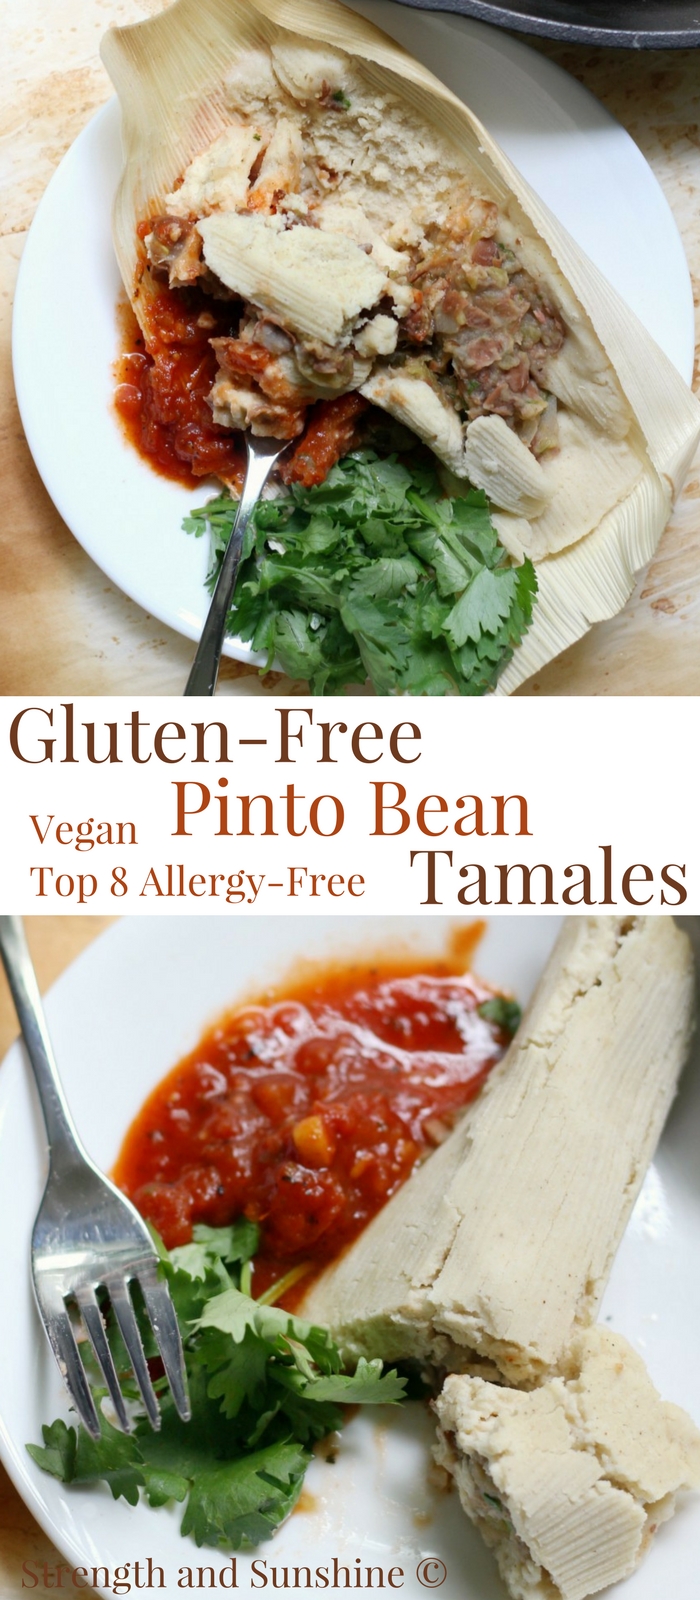 Gluten-Free Pinto Bean Tamales (Vegan, Allergy-Free) | Strength and Sunshine @RebeccaGF666 An easy Mexican tamale recipe with a homemade masa dough and spicy pinto bean filling. These Gluten-Free Pinto Bean Tamales are vegan and top 8 allergy-free, making them a great meatless weeknight meal the whole family will love! #tamales #pintobeans #glutenfree #vegan #mexican #allergyfree #strengthandsunshine